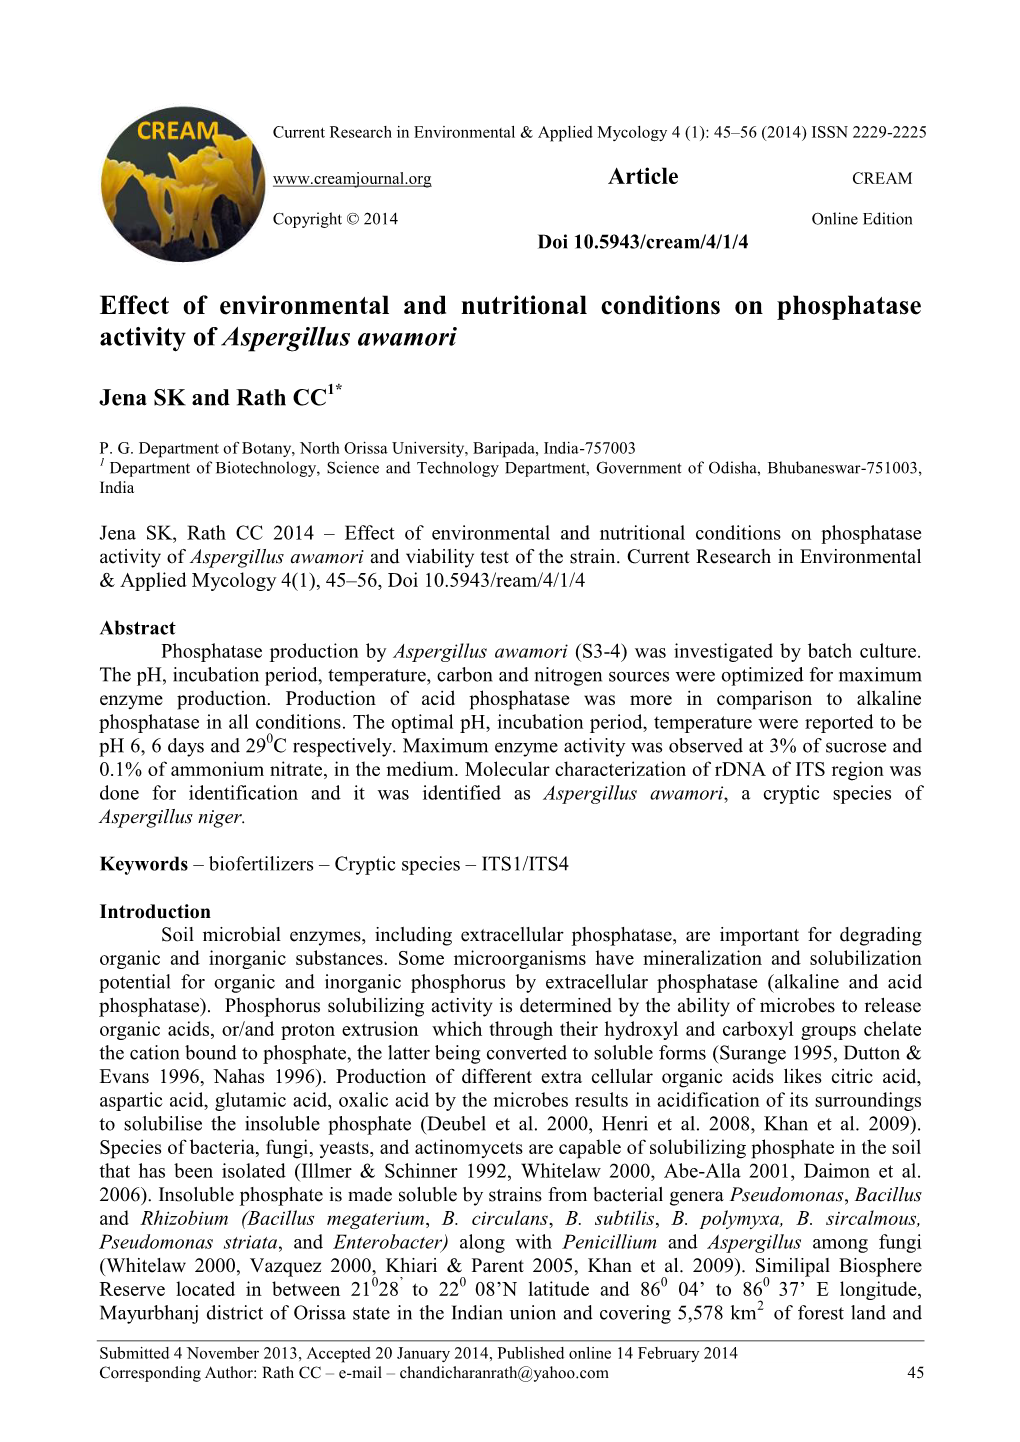 Effect of Environmental and Nutritional Conditions on Phosphatase Activity of Aspergillus Awamori